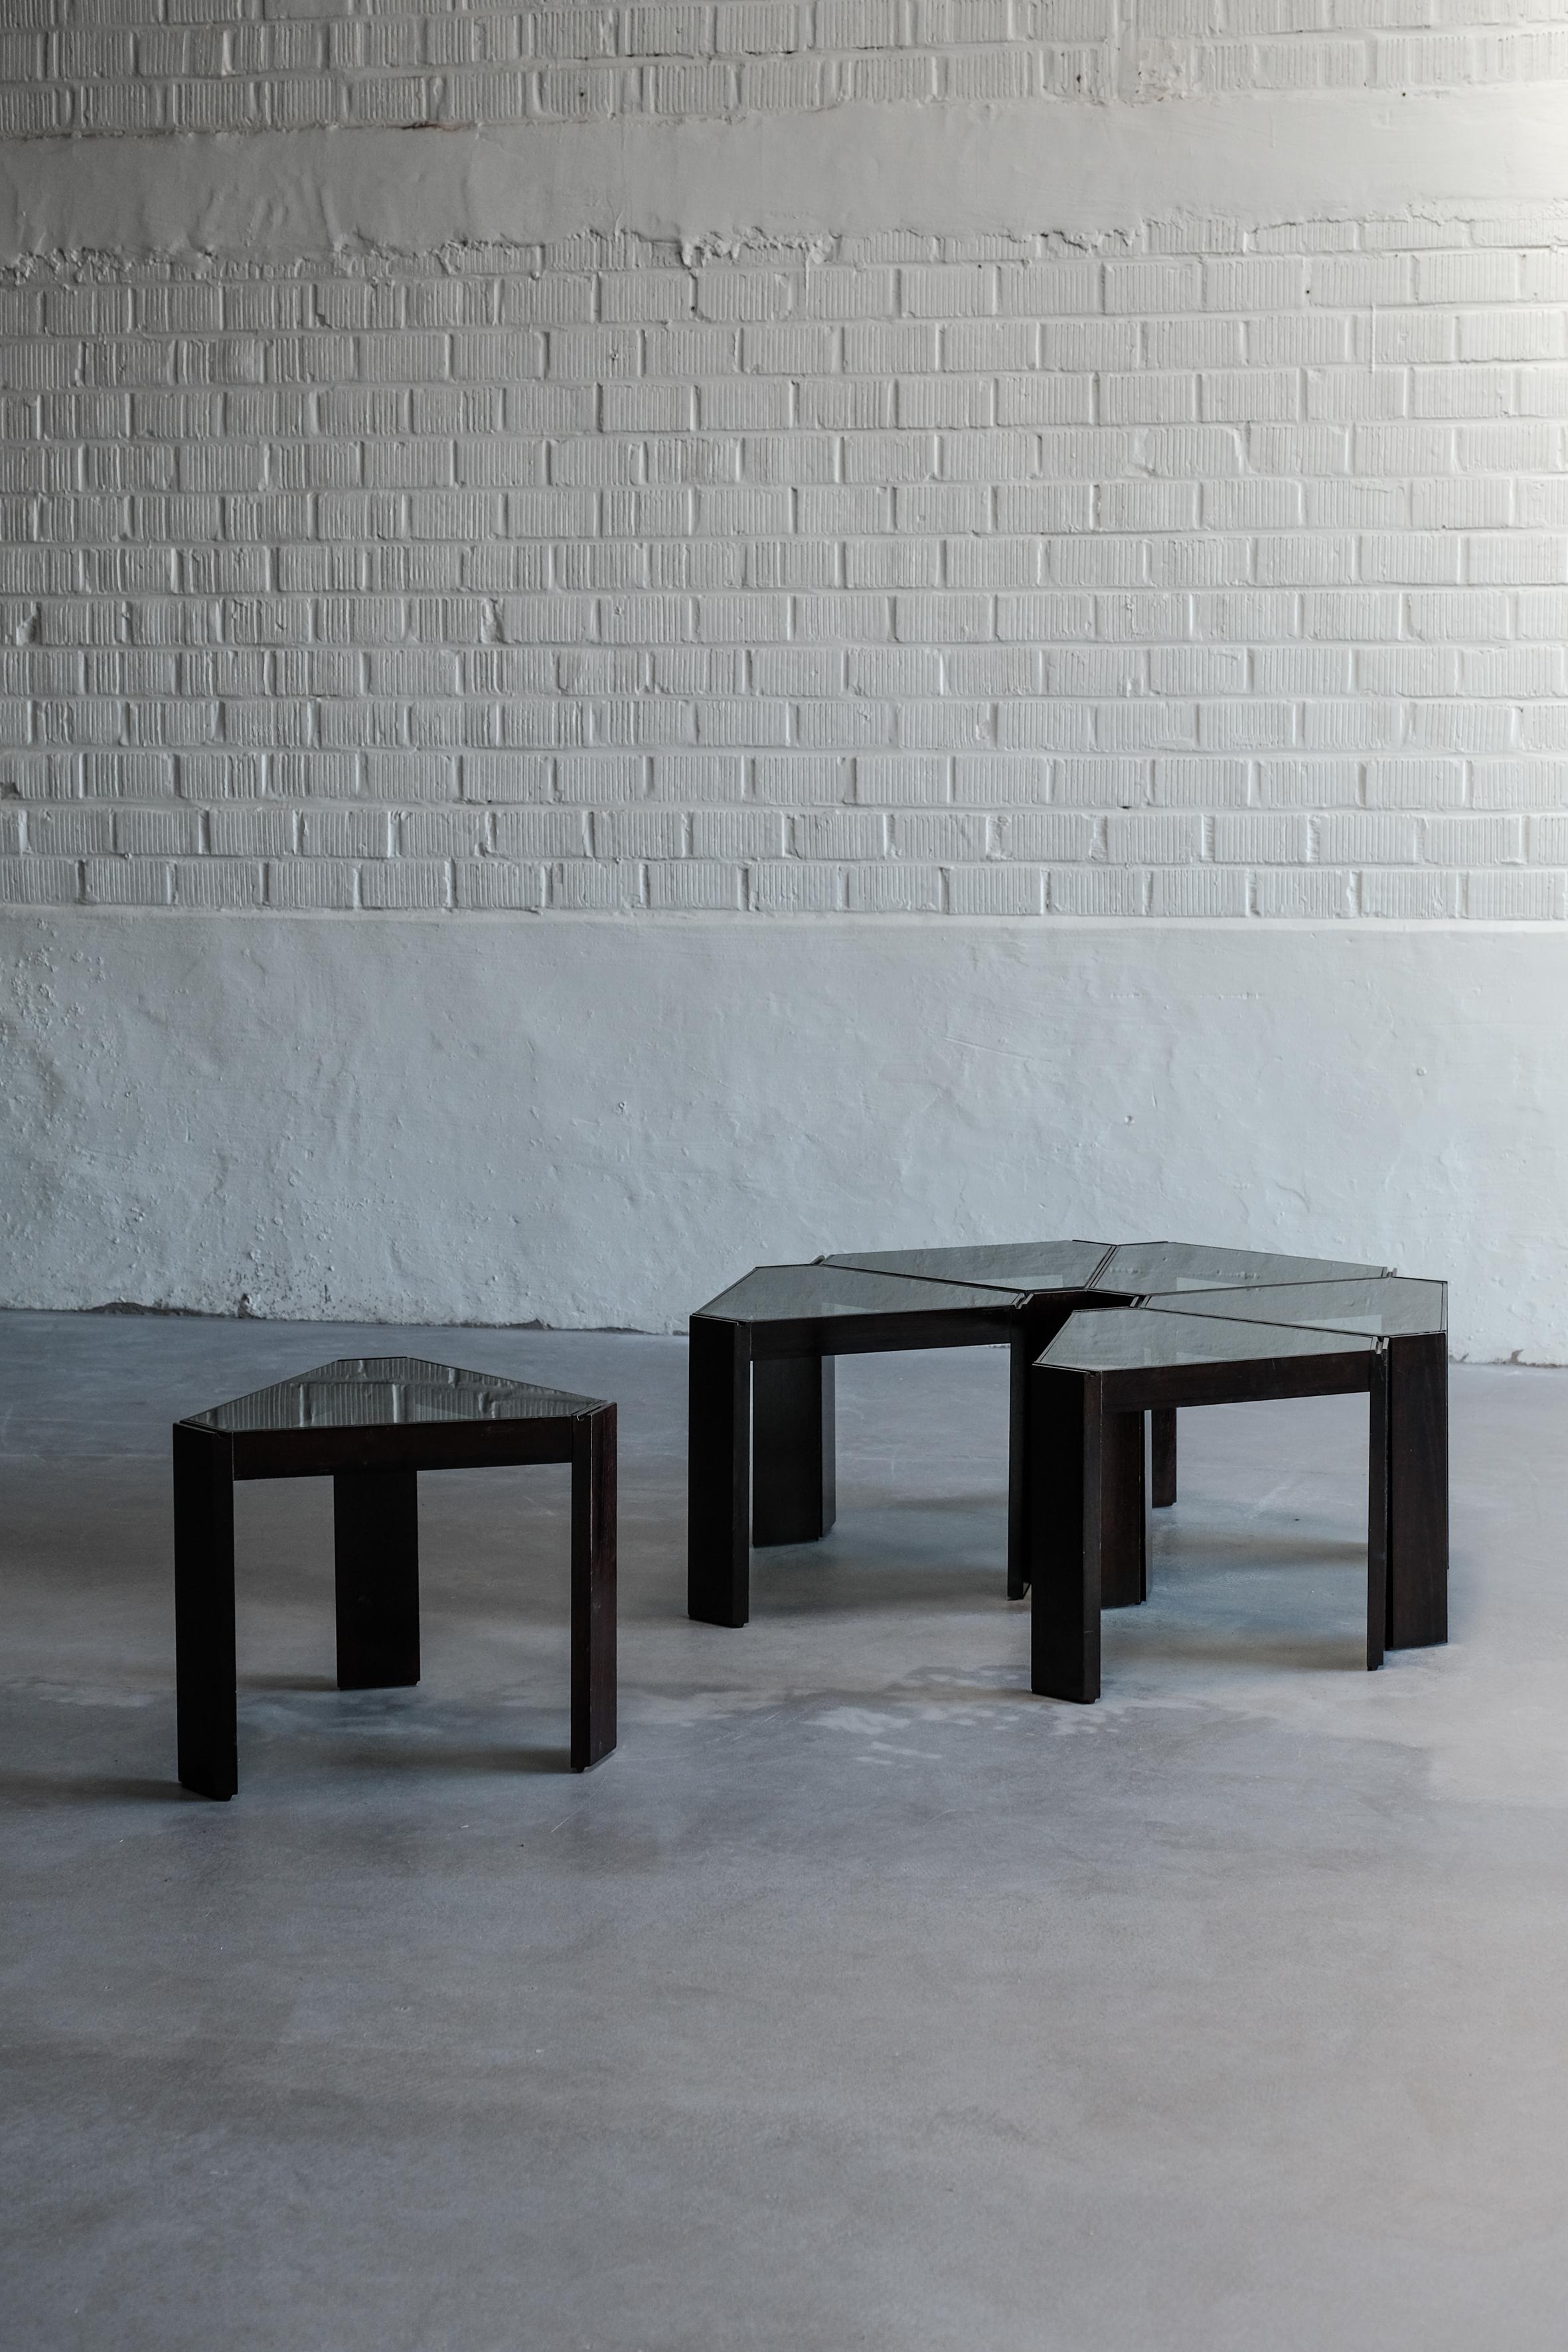 Stunning Set of 6 Arredi Tables,

Designed to come together seamlessly as one big circle when put together. 

Each table is in very good vintage condition. Their versatile design allows them to be stacked for easy storage or arranged in various